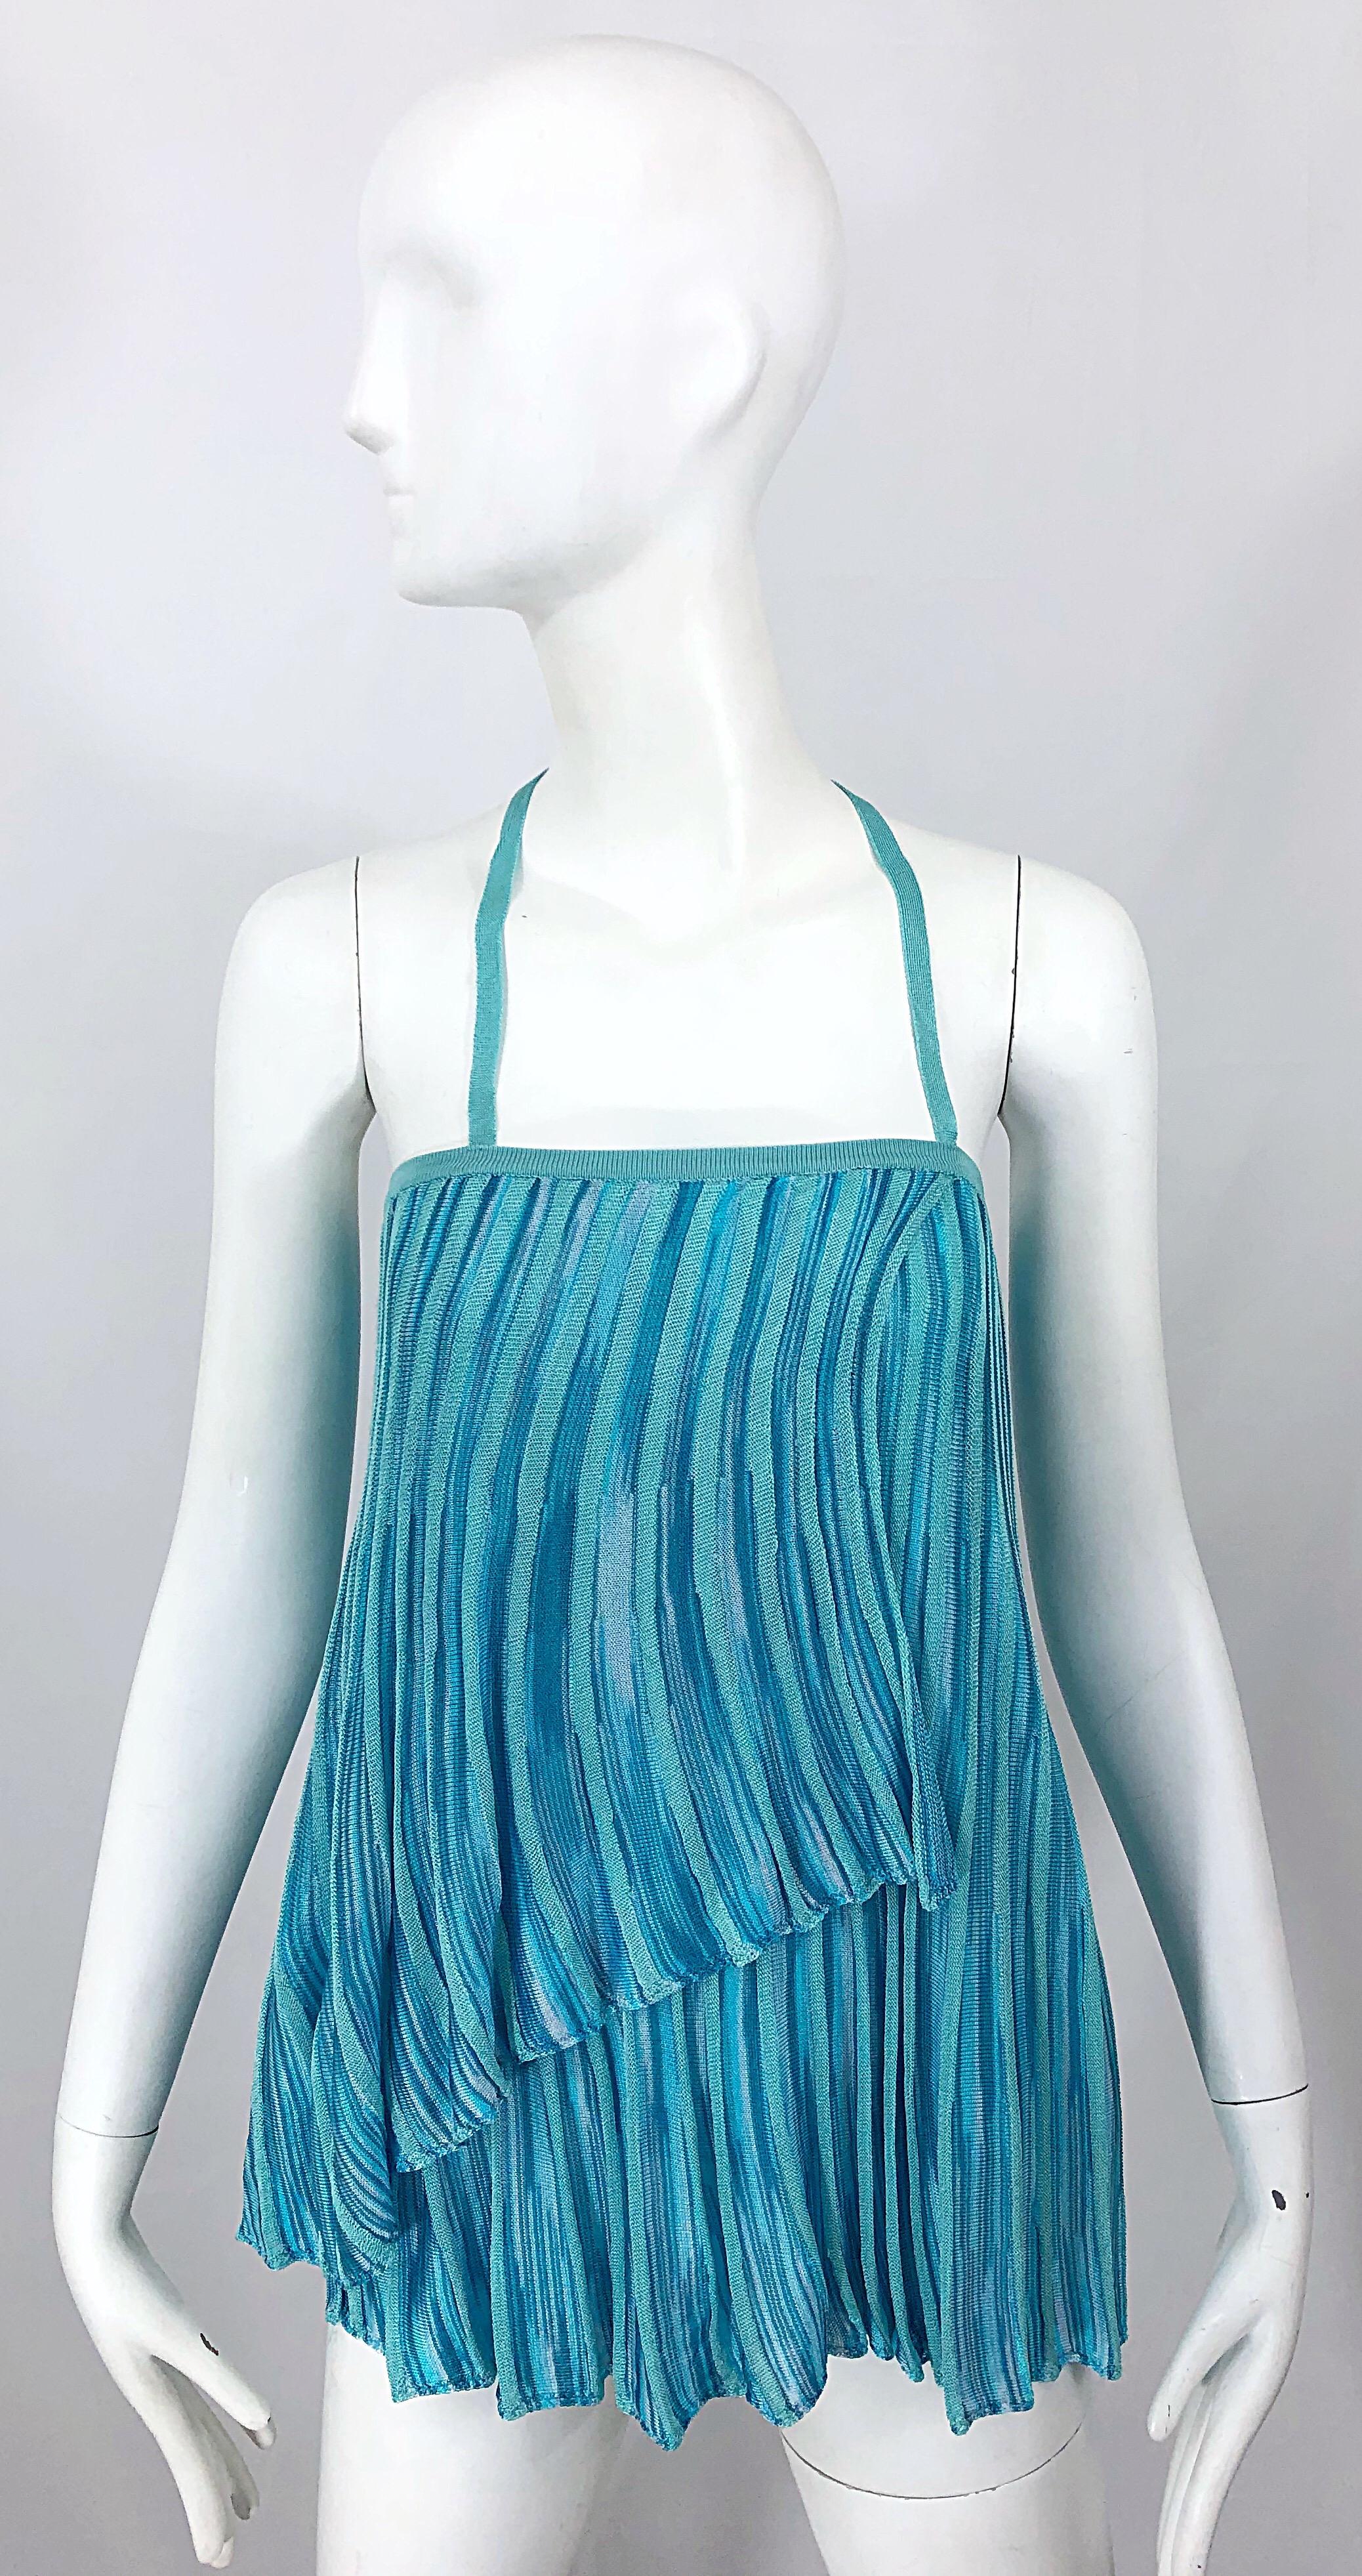 Chic vintage 1990s MISSONI turquoise, teal, and blue signature rayon knit halter top OR skirt! Features bold vibrant shades of blue that are perfect on any skin tone. Simple slips over the head. Strap can also be tucked in to be worn as a tube top